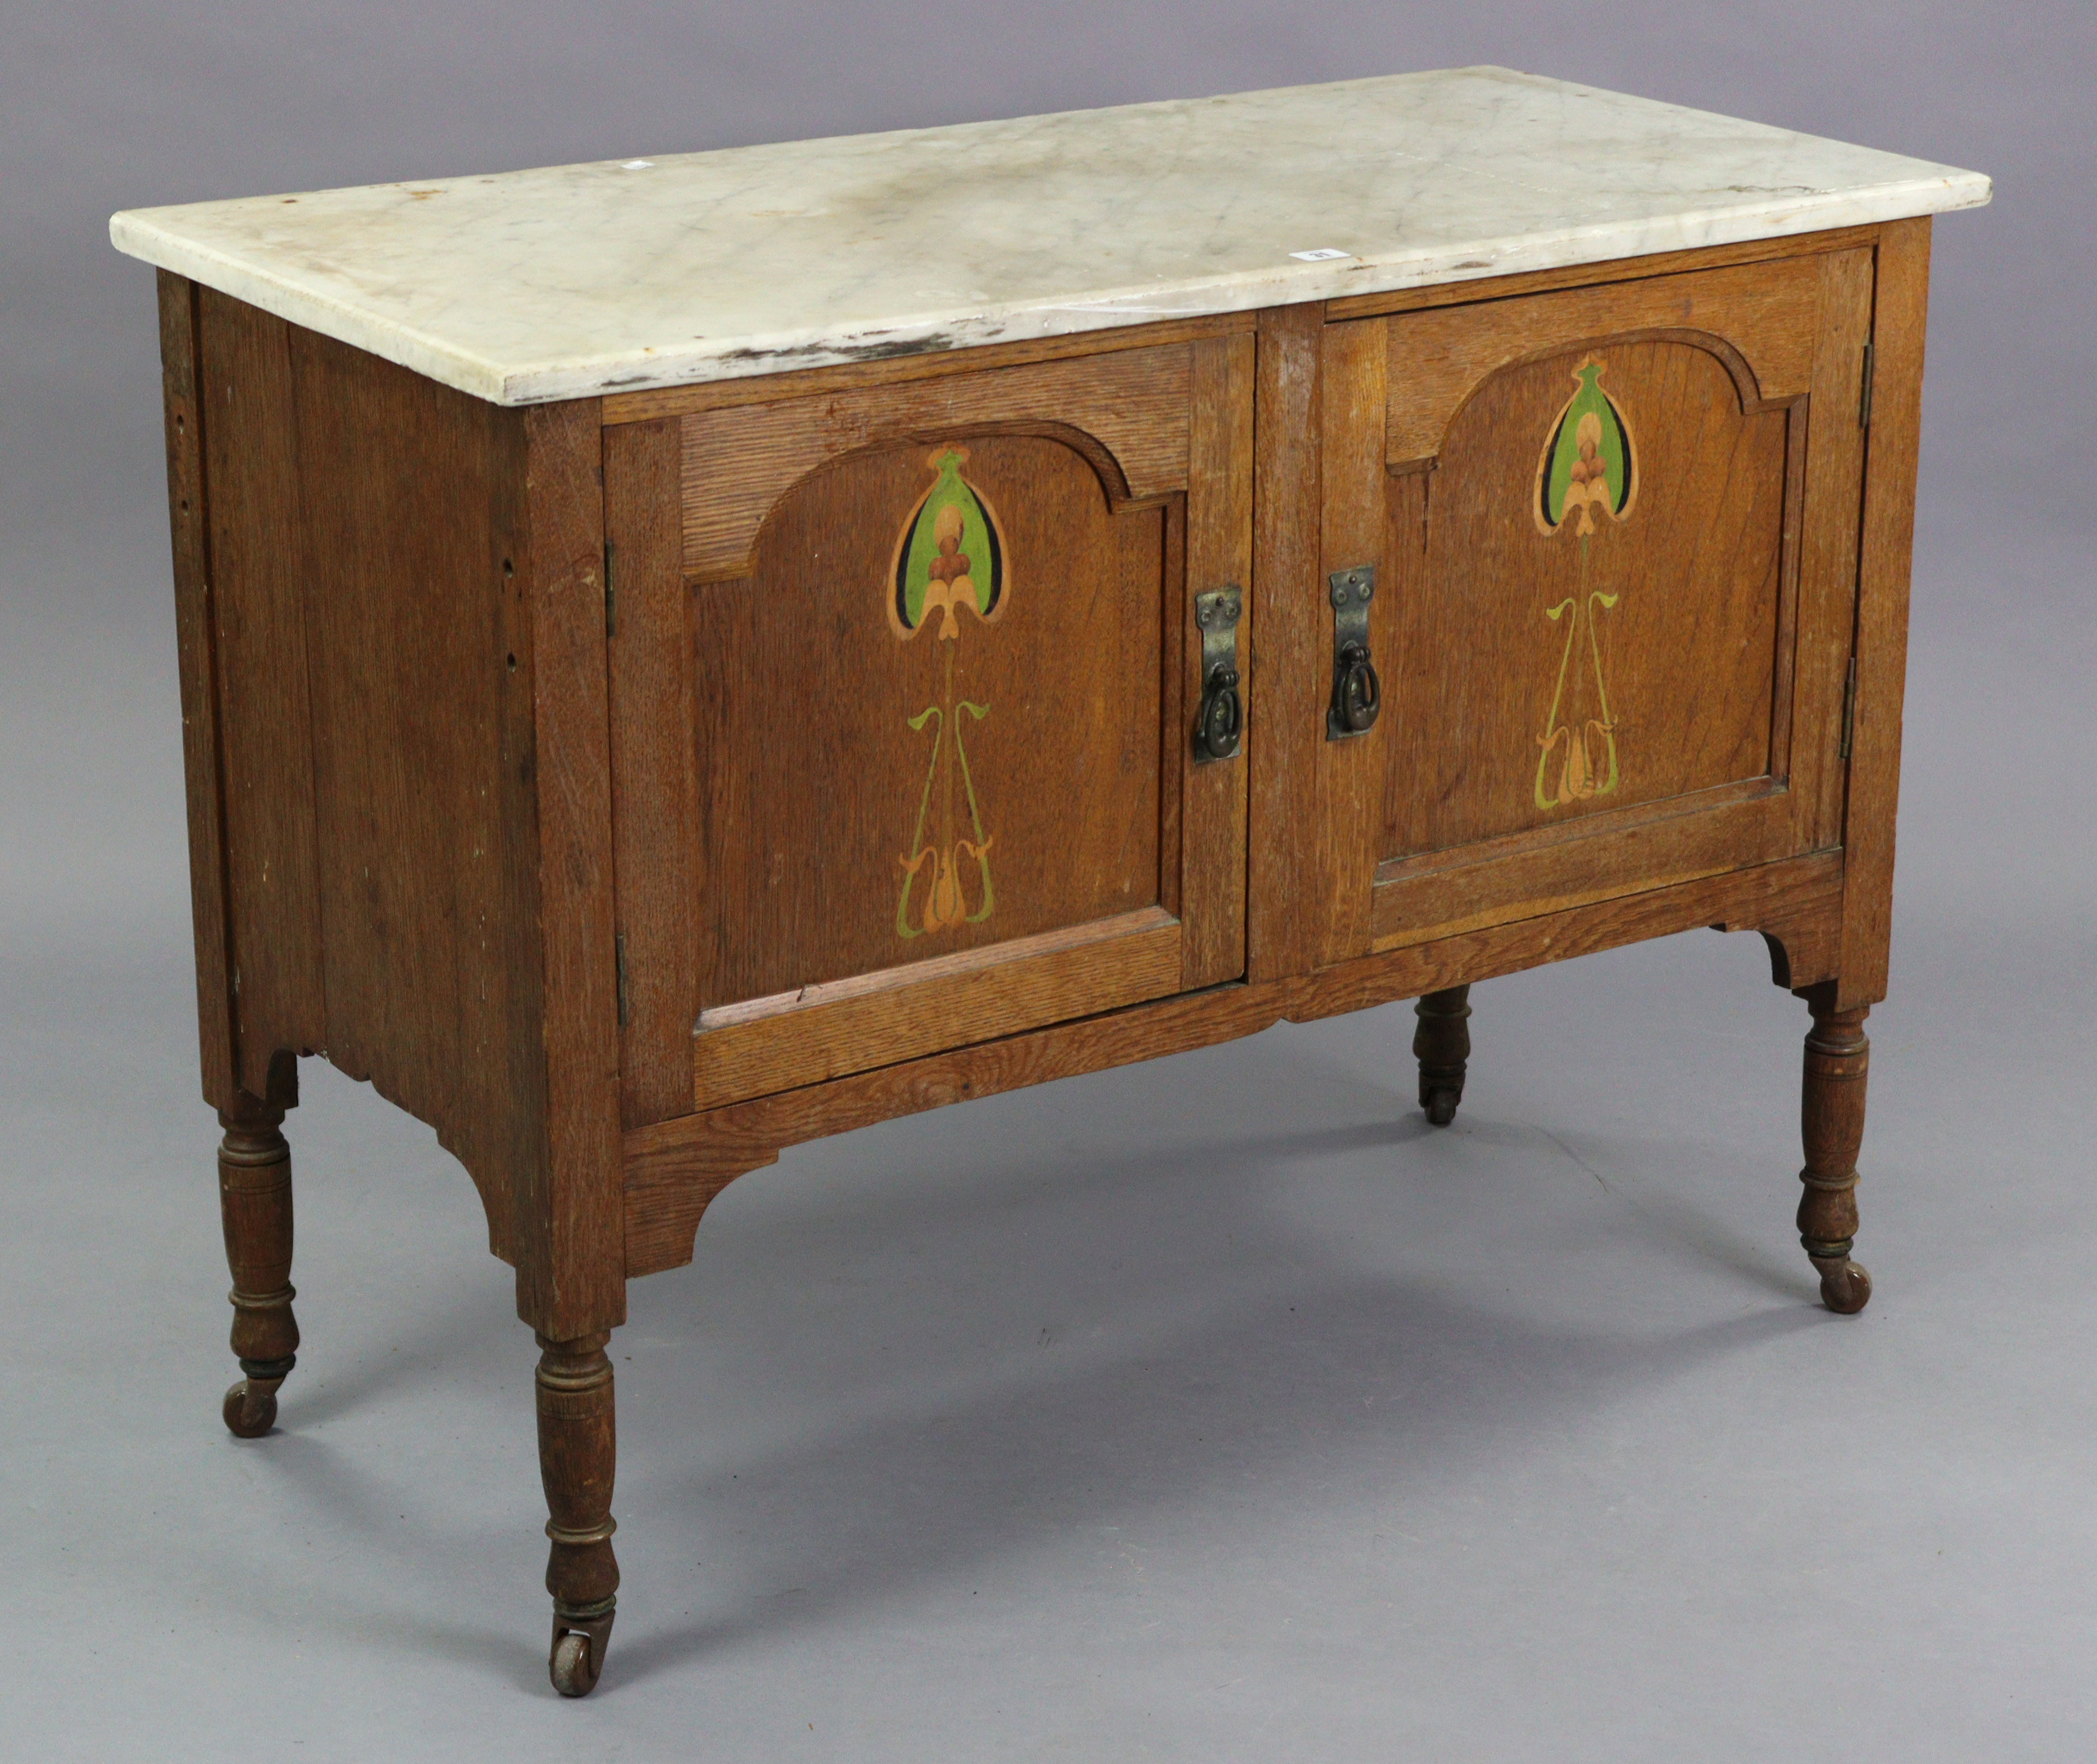 An Edwardian oak marble-top washstand enclosed by pair of panel doors with painted Arts & Crafts sty